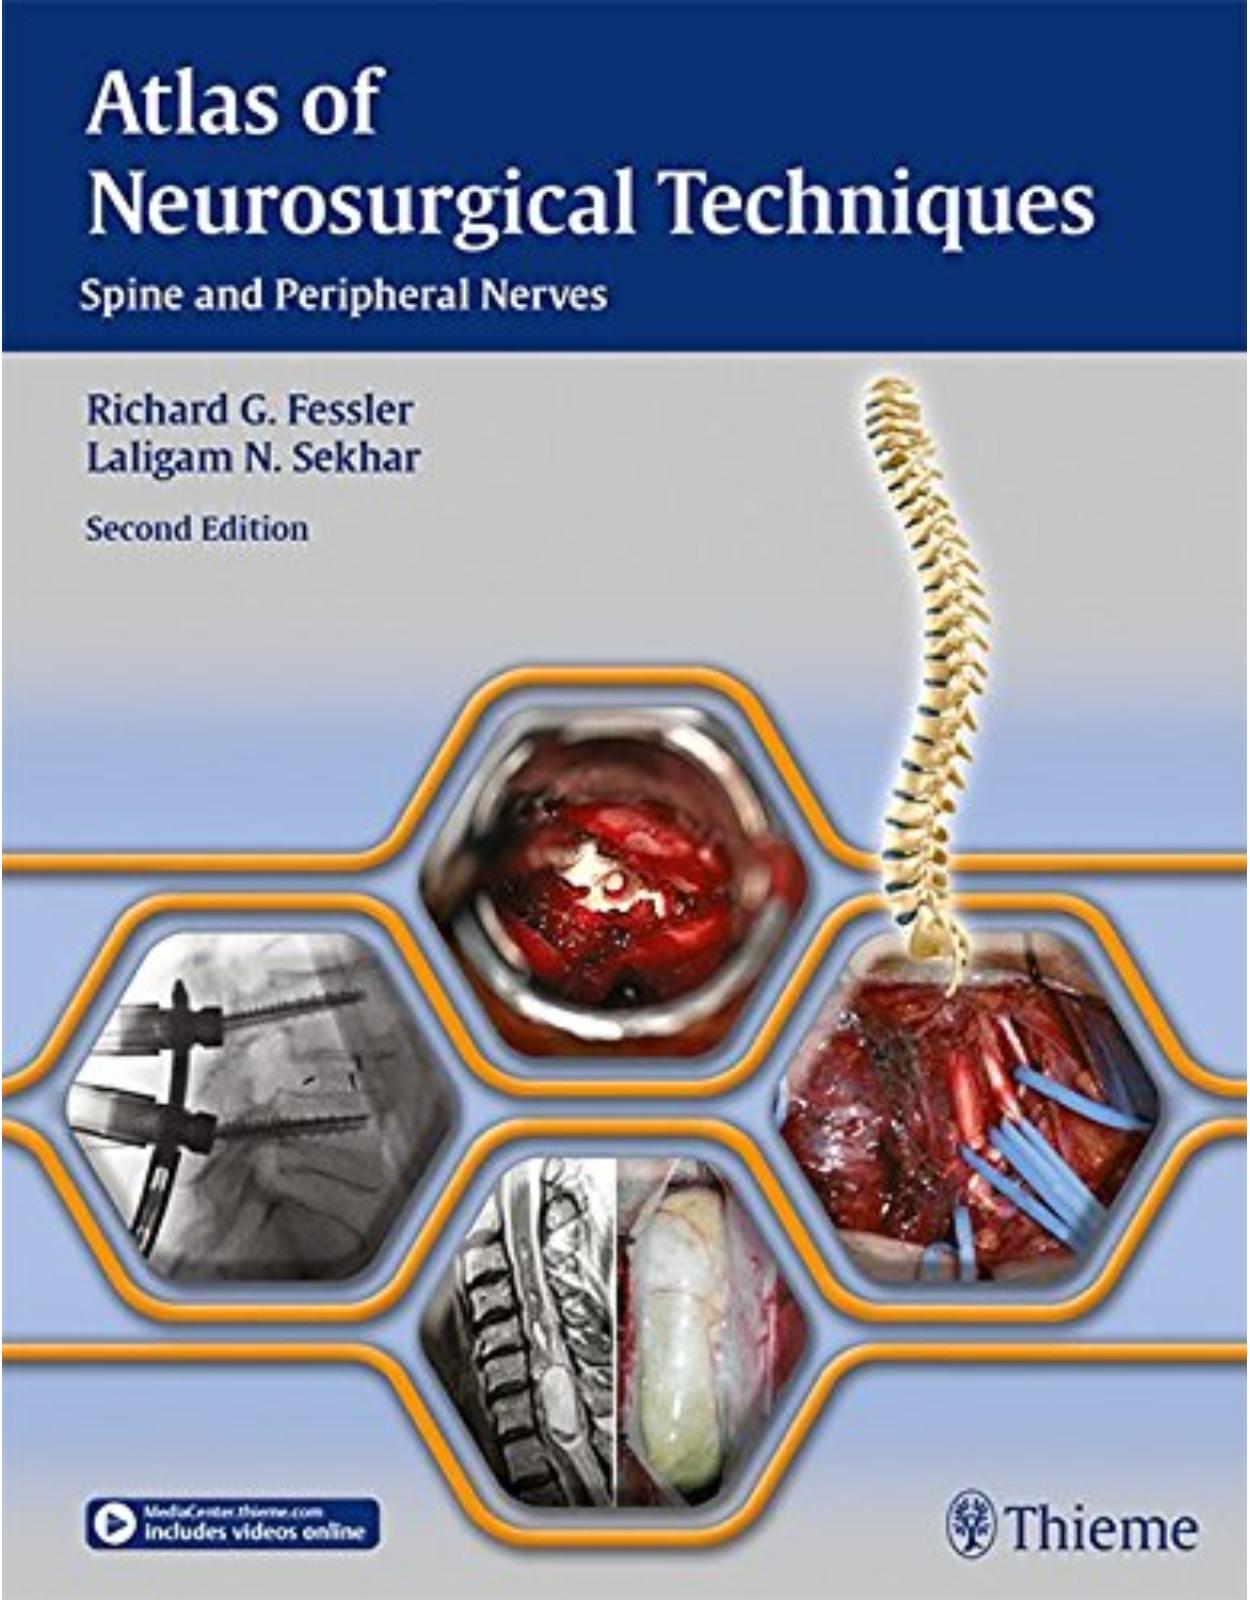 Atlas of Neurosurgical Techniques. Spine and Peripheral Nerves, 2nd Edition